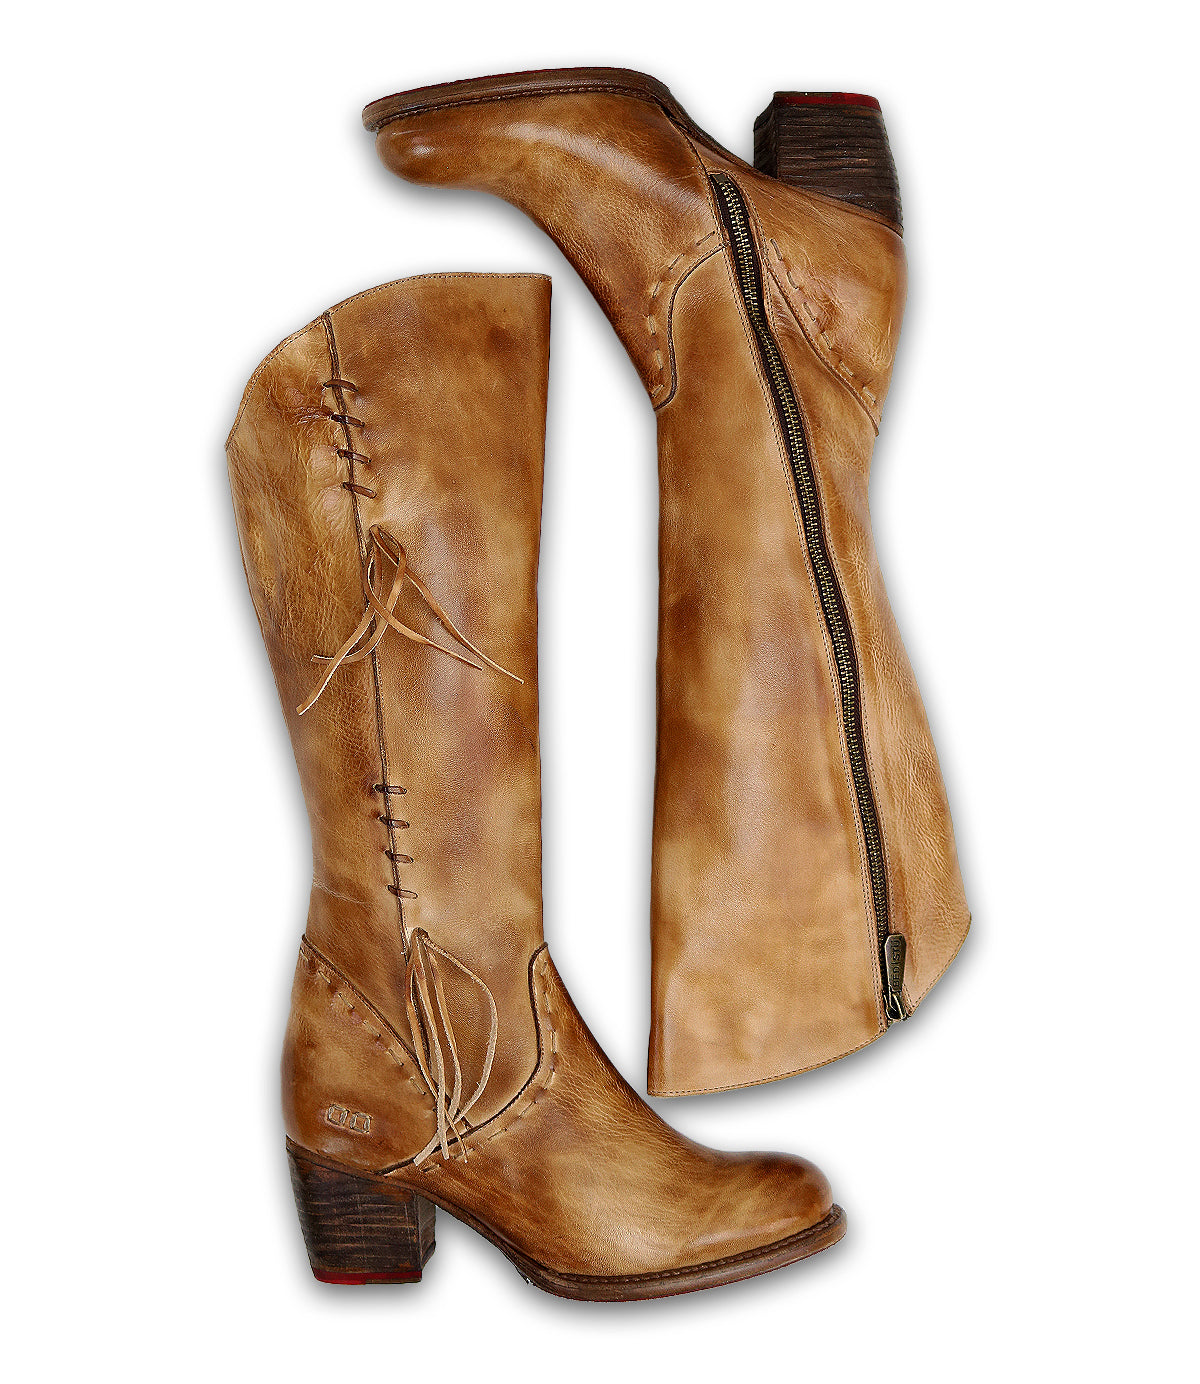 A pair of women's Charis boots by Bed Stu on a white background.